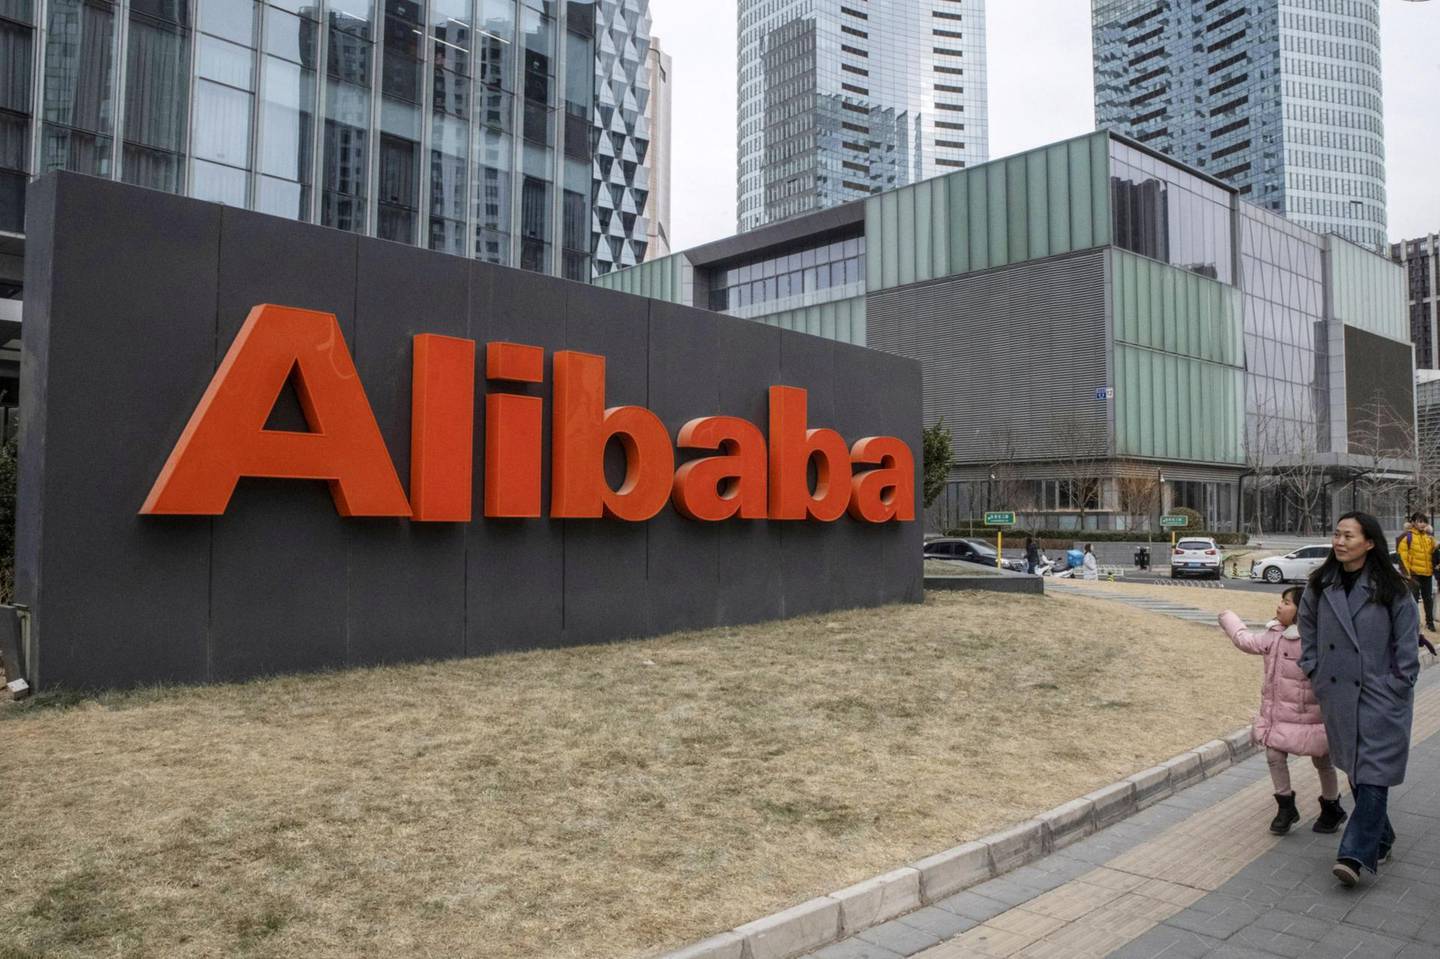 People walk past the Alibaba Group Holdings Ltd. signage displayed outside the company's Beijing office in Beijing, China, on Wednesday, Jan. 30, 2019. Alibaba is scheduled to release its third-quarter earnings figures on Jan. 30. Photographer: Gilles Sabrie/Bloomberg